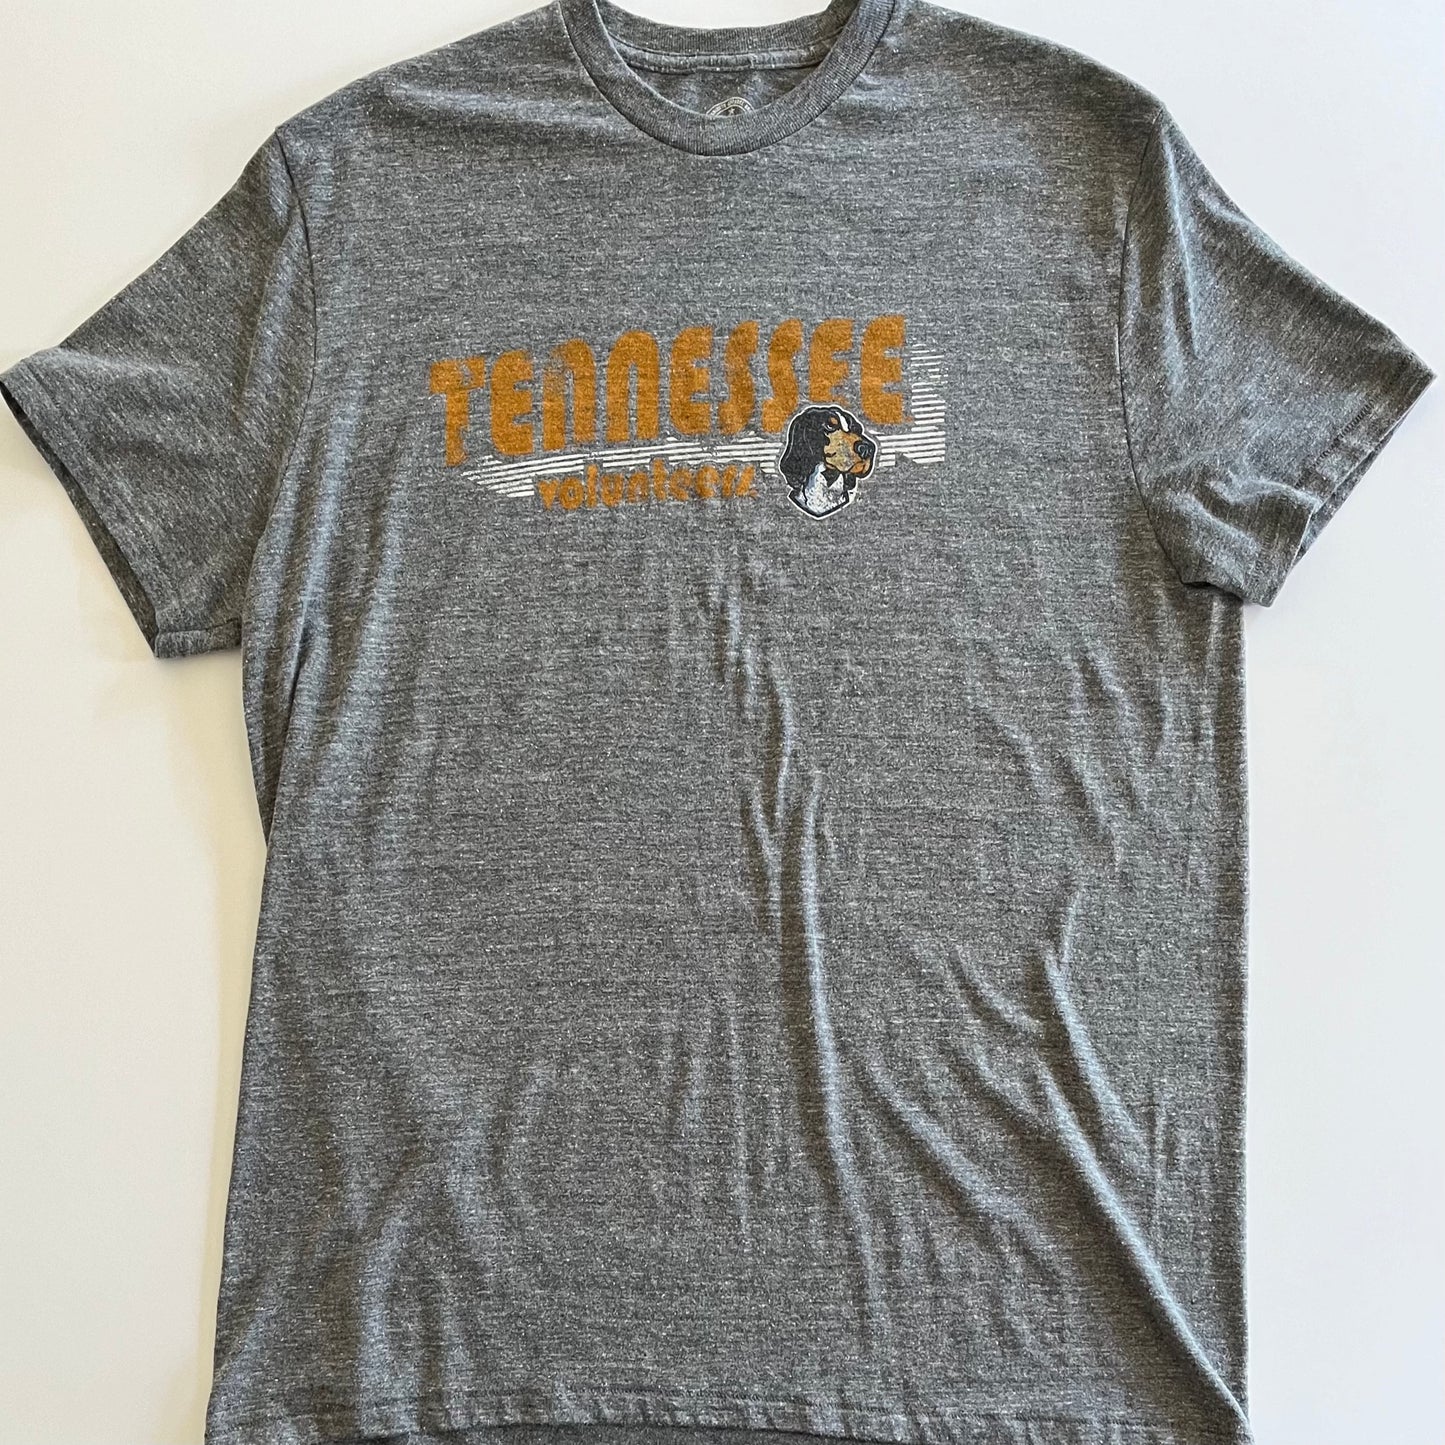 University of Tennessee - Rivalry Threads Tee (X-Large)